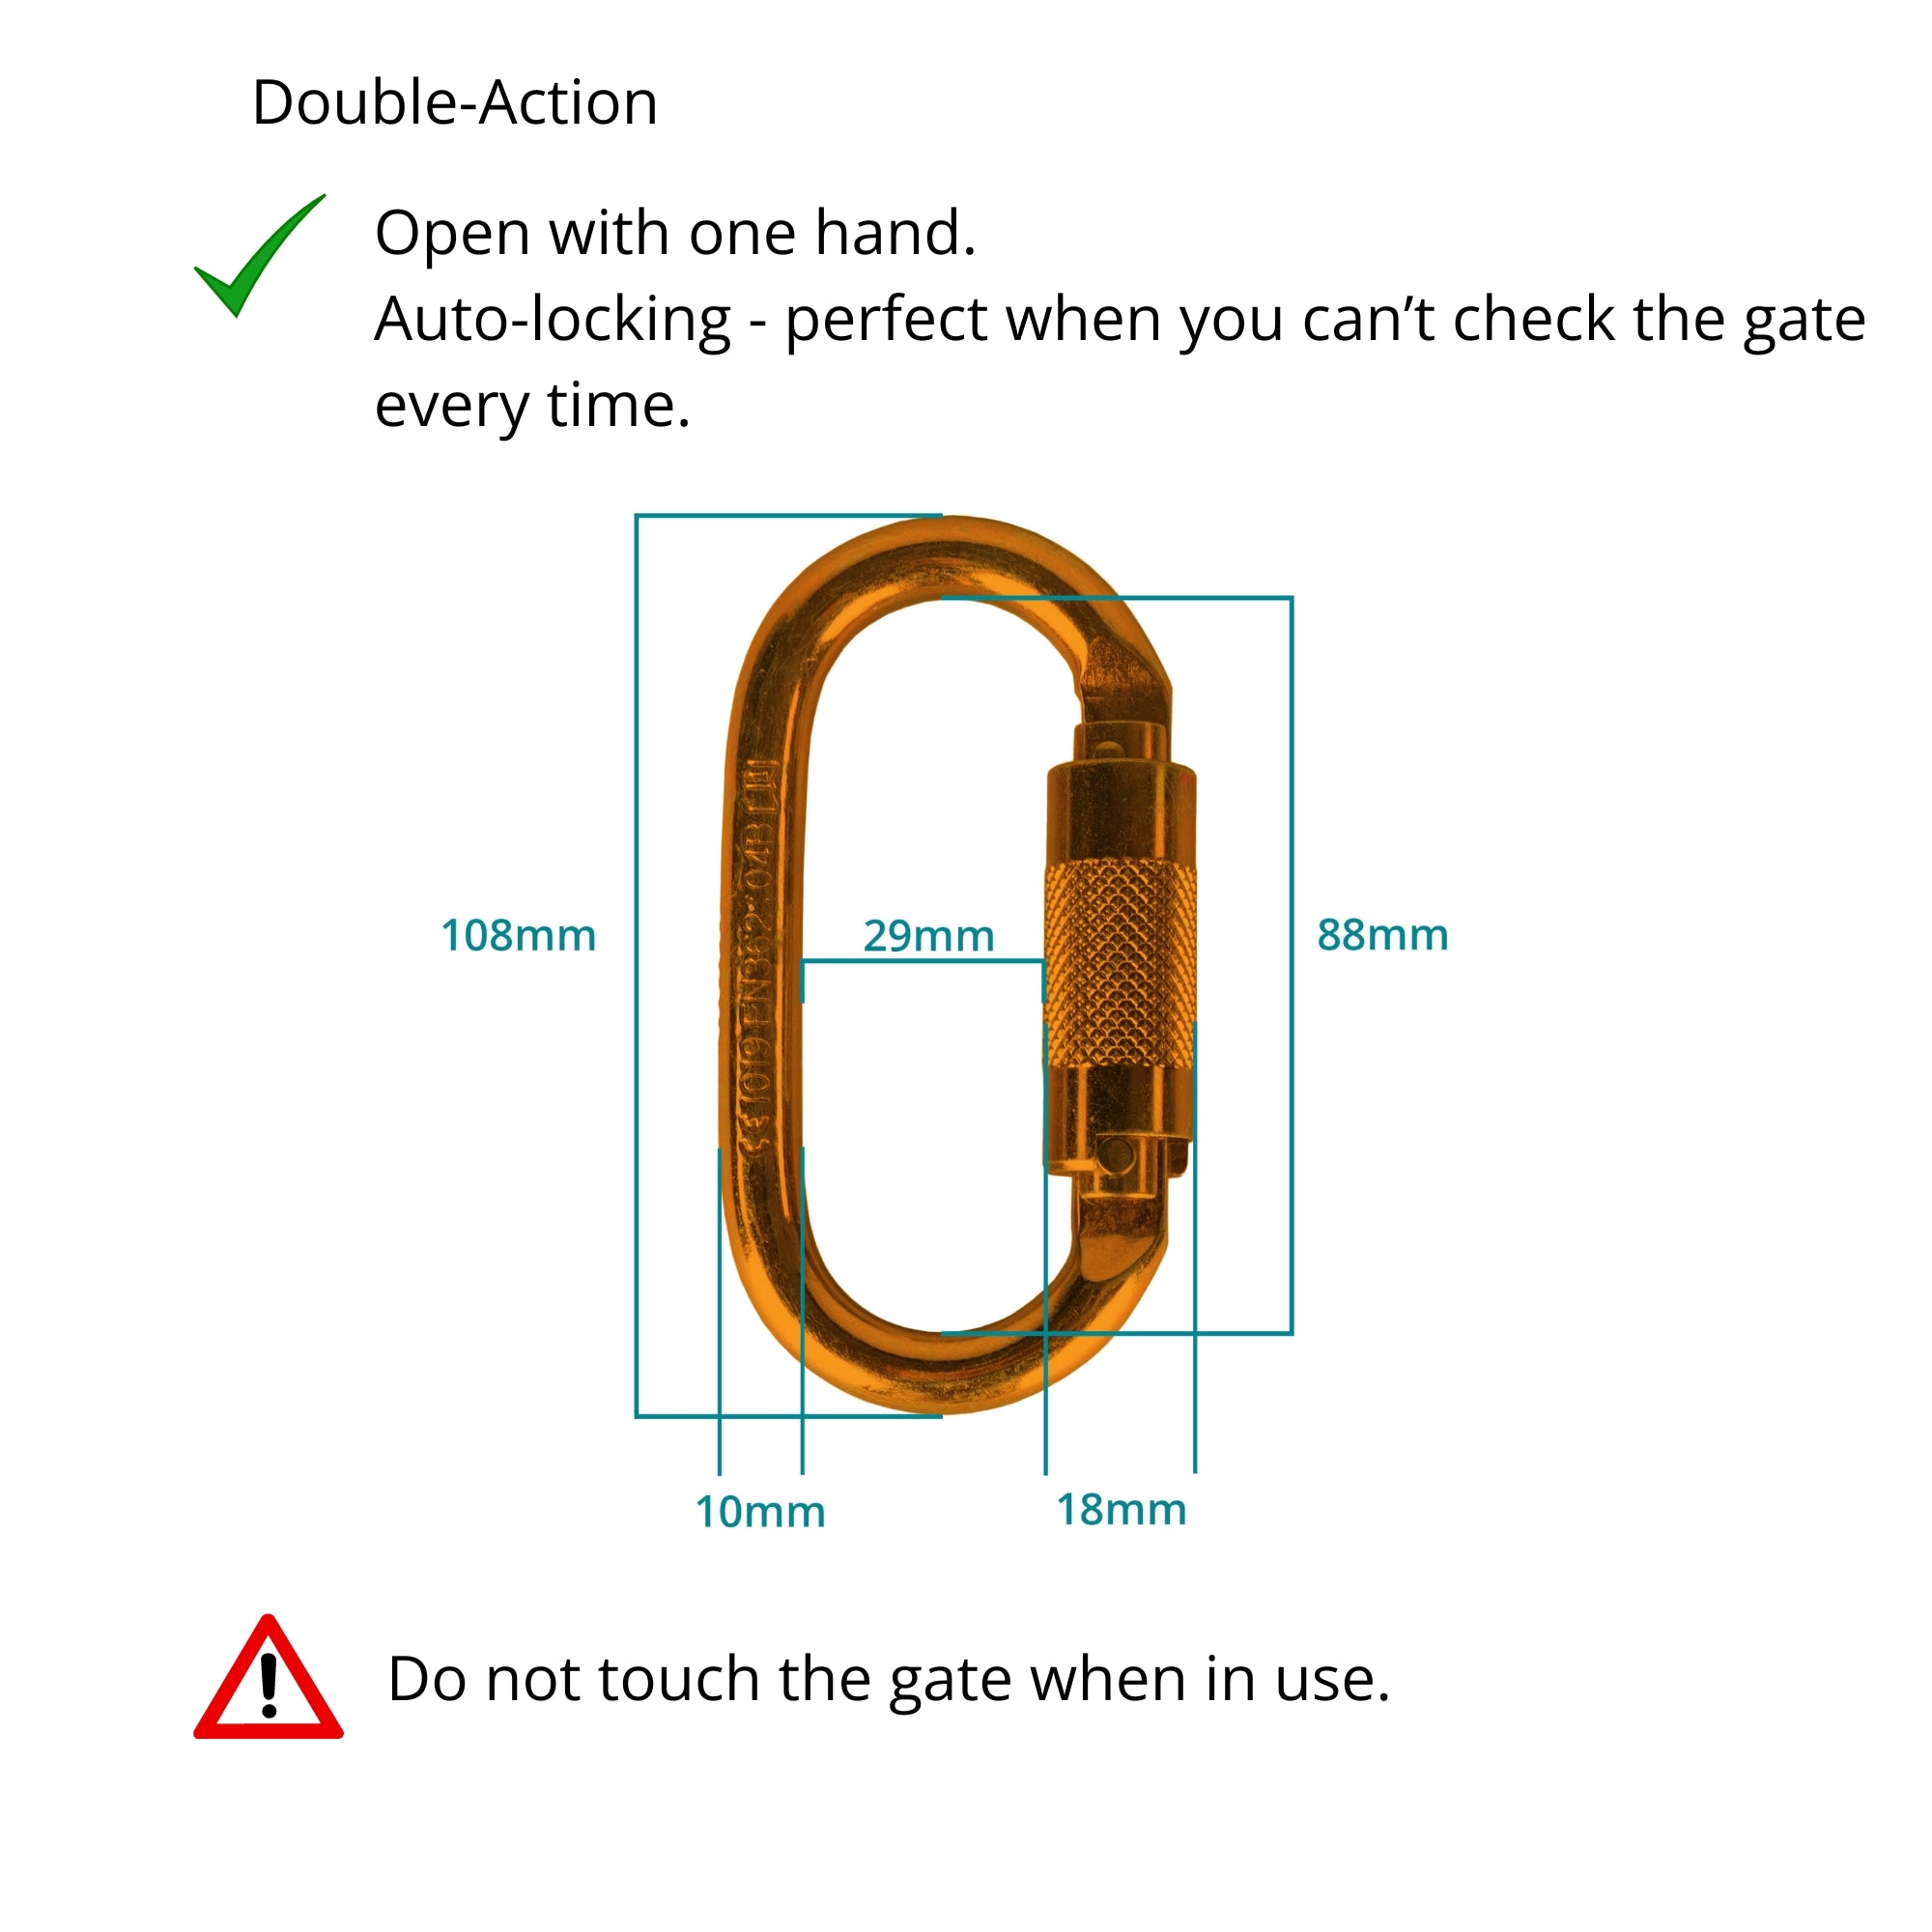 double action carabiner measurements and info